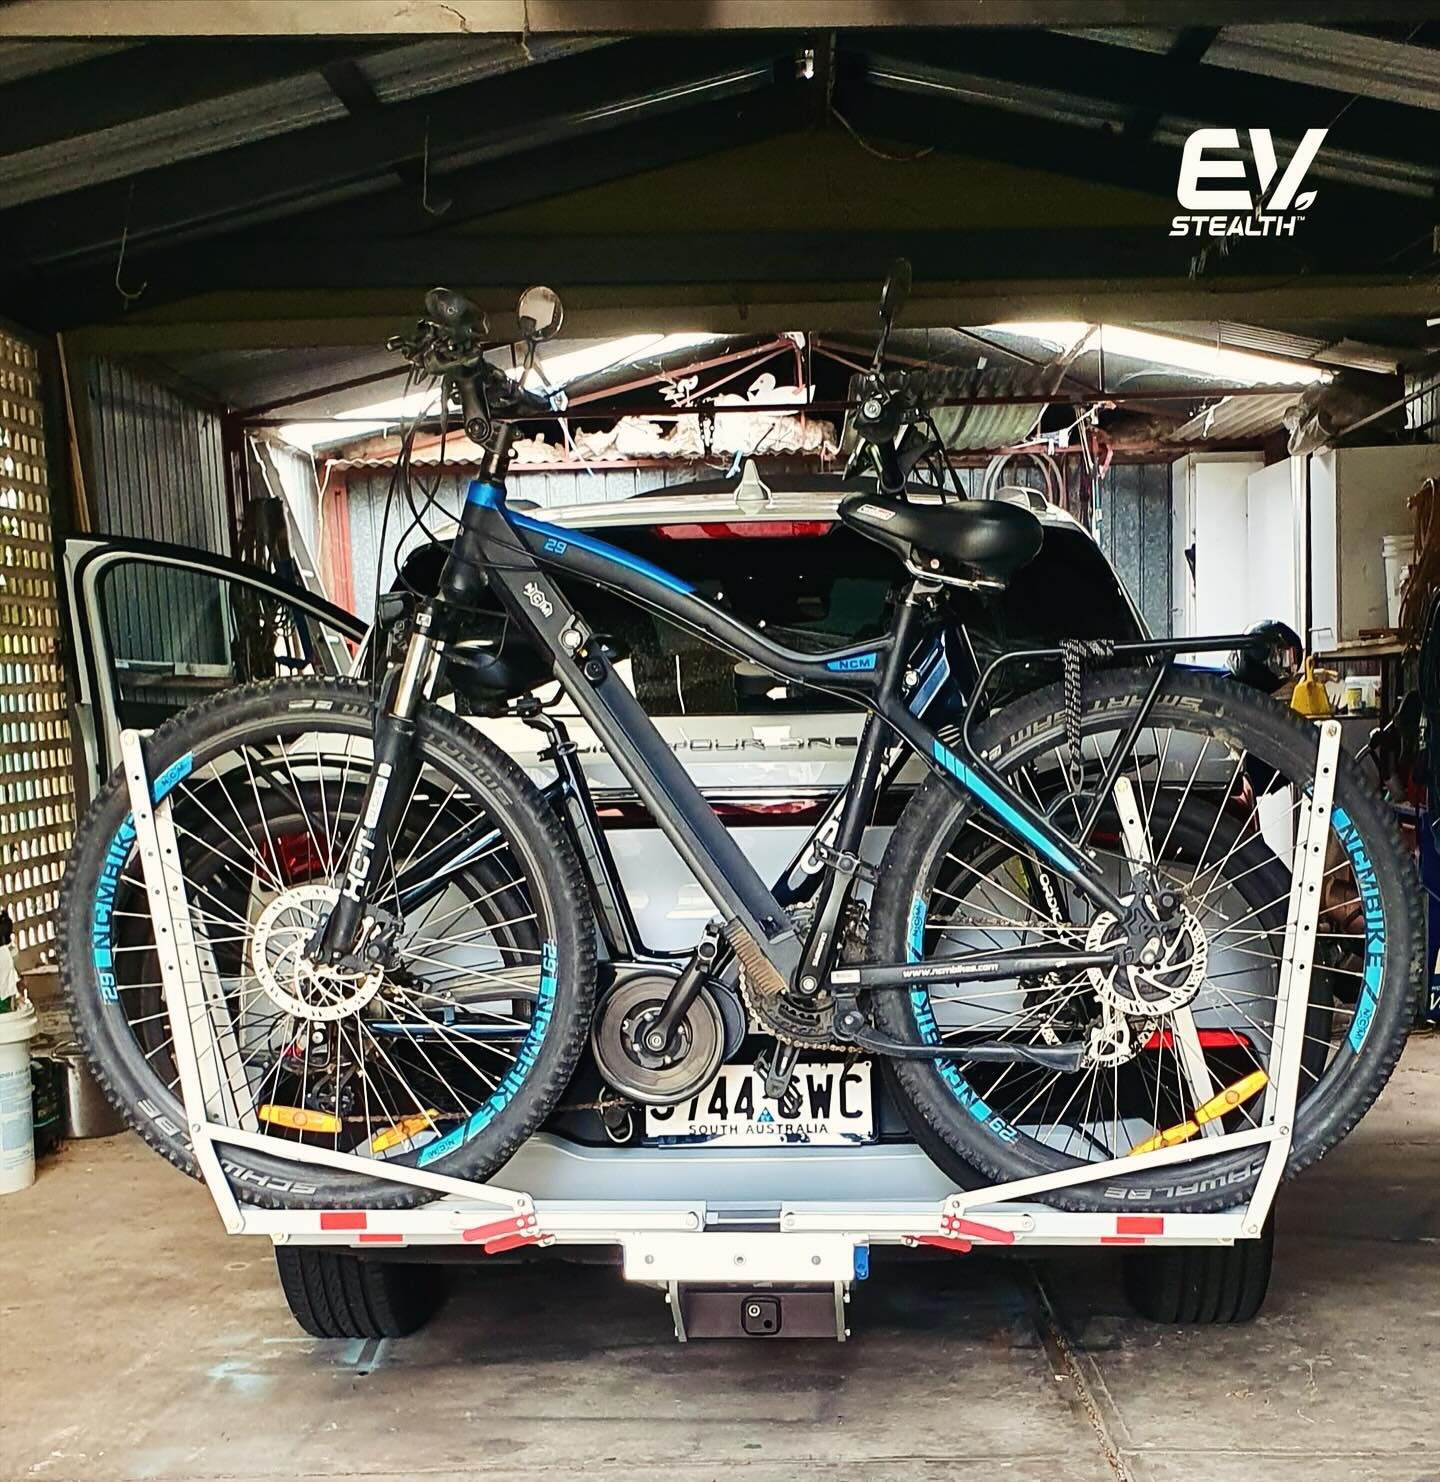 The #bydatto3 expanded experience with our EV Stealth towbars and @1upusa bike racks.
.
.
.
.
.
#evstealthsolutions #evtowing #evtowbars #juxtaposition #sustainabletransport #emobility #evstealth #electriccarsaustralia #electricvehicles #stealthmode 